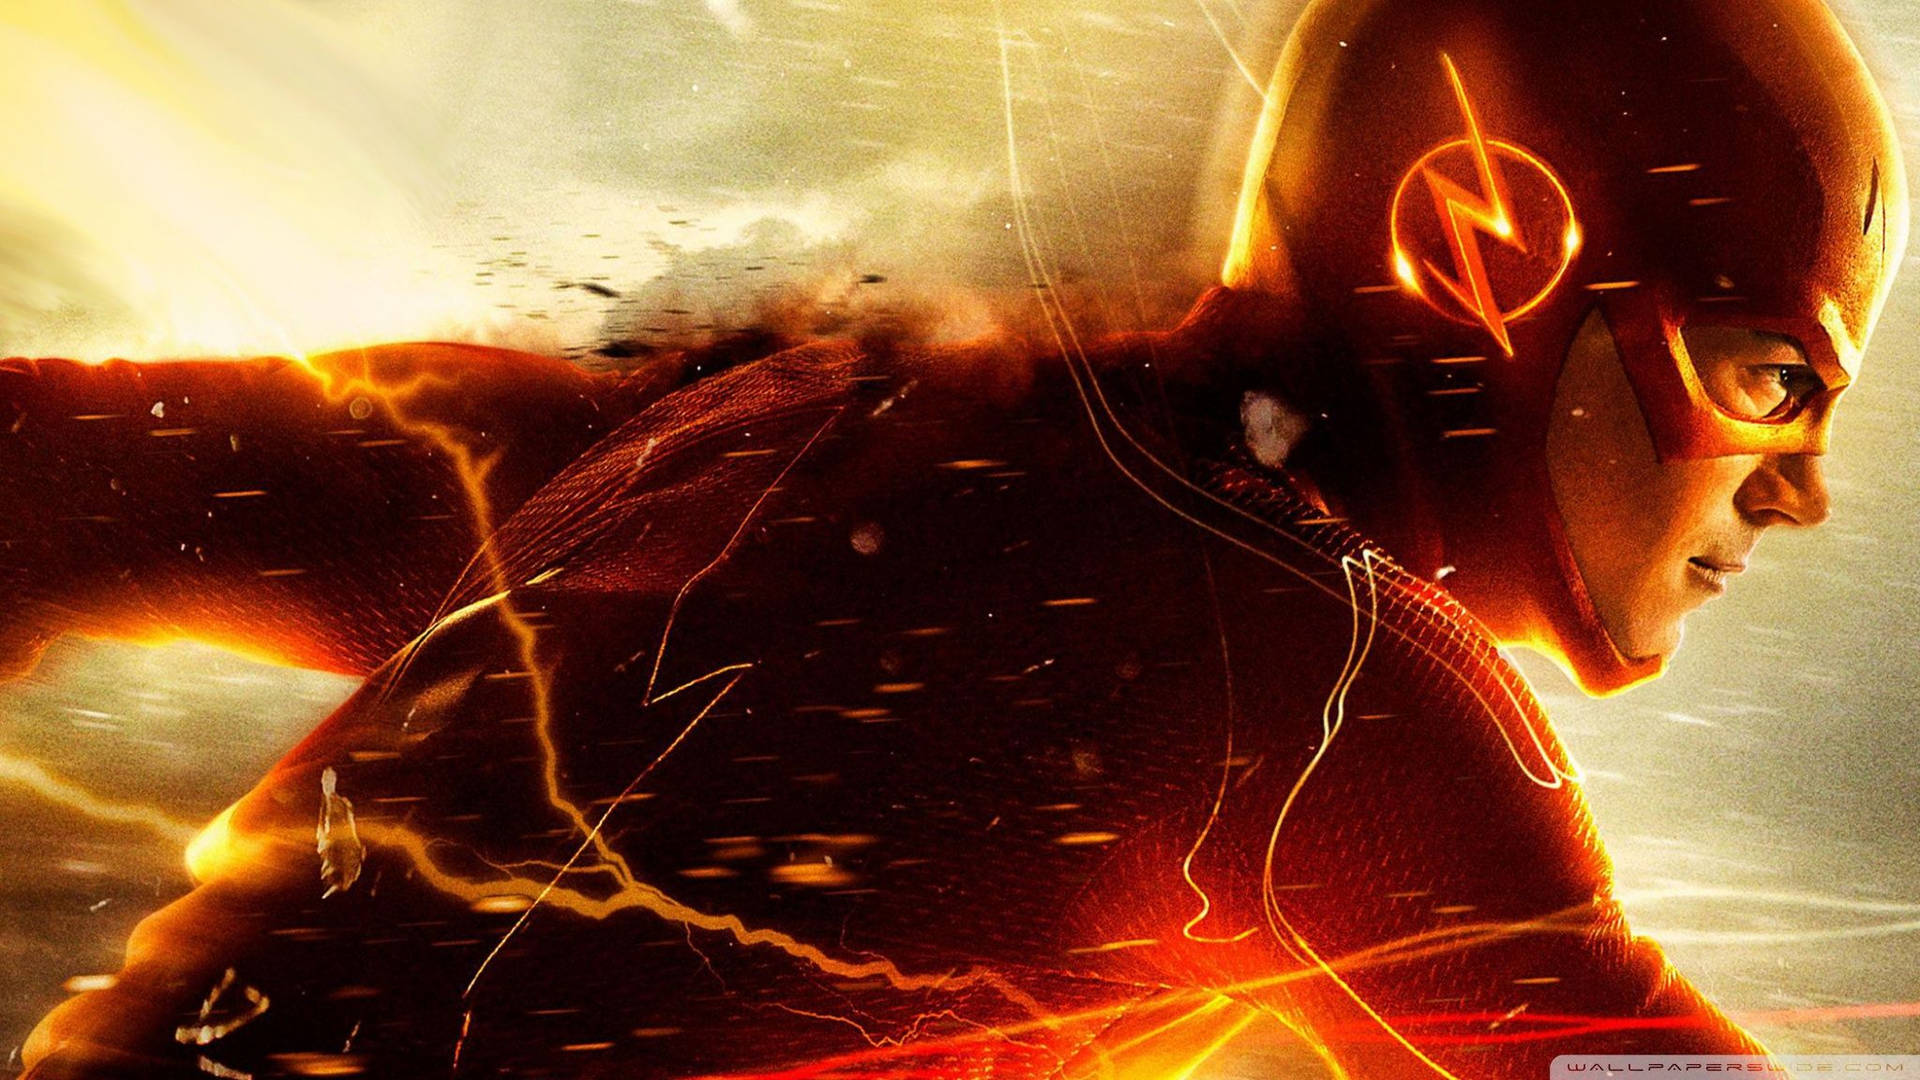 Barry Allen Saves The Day As The Flash Wallpaper